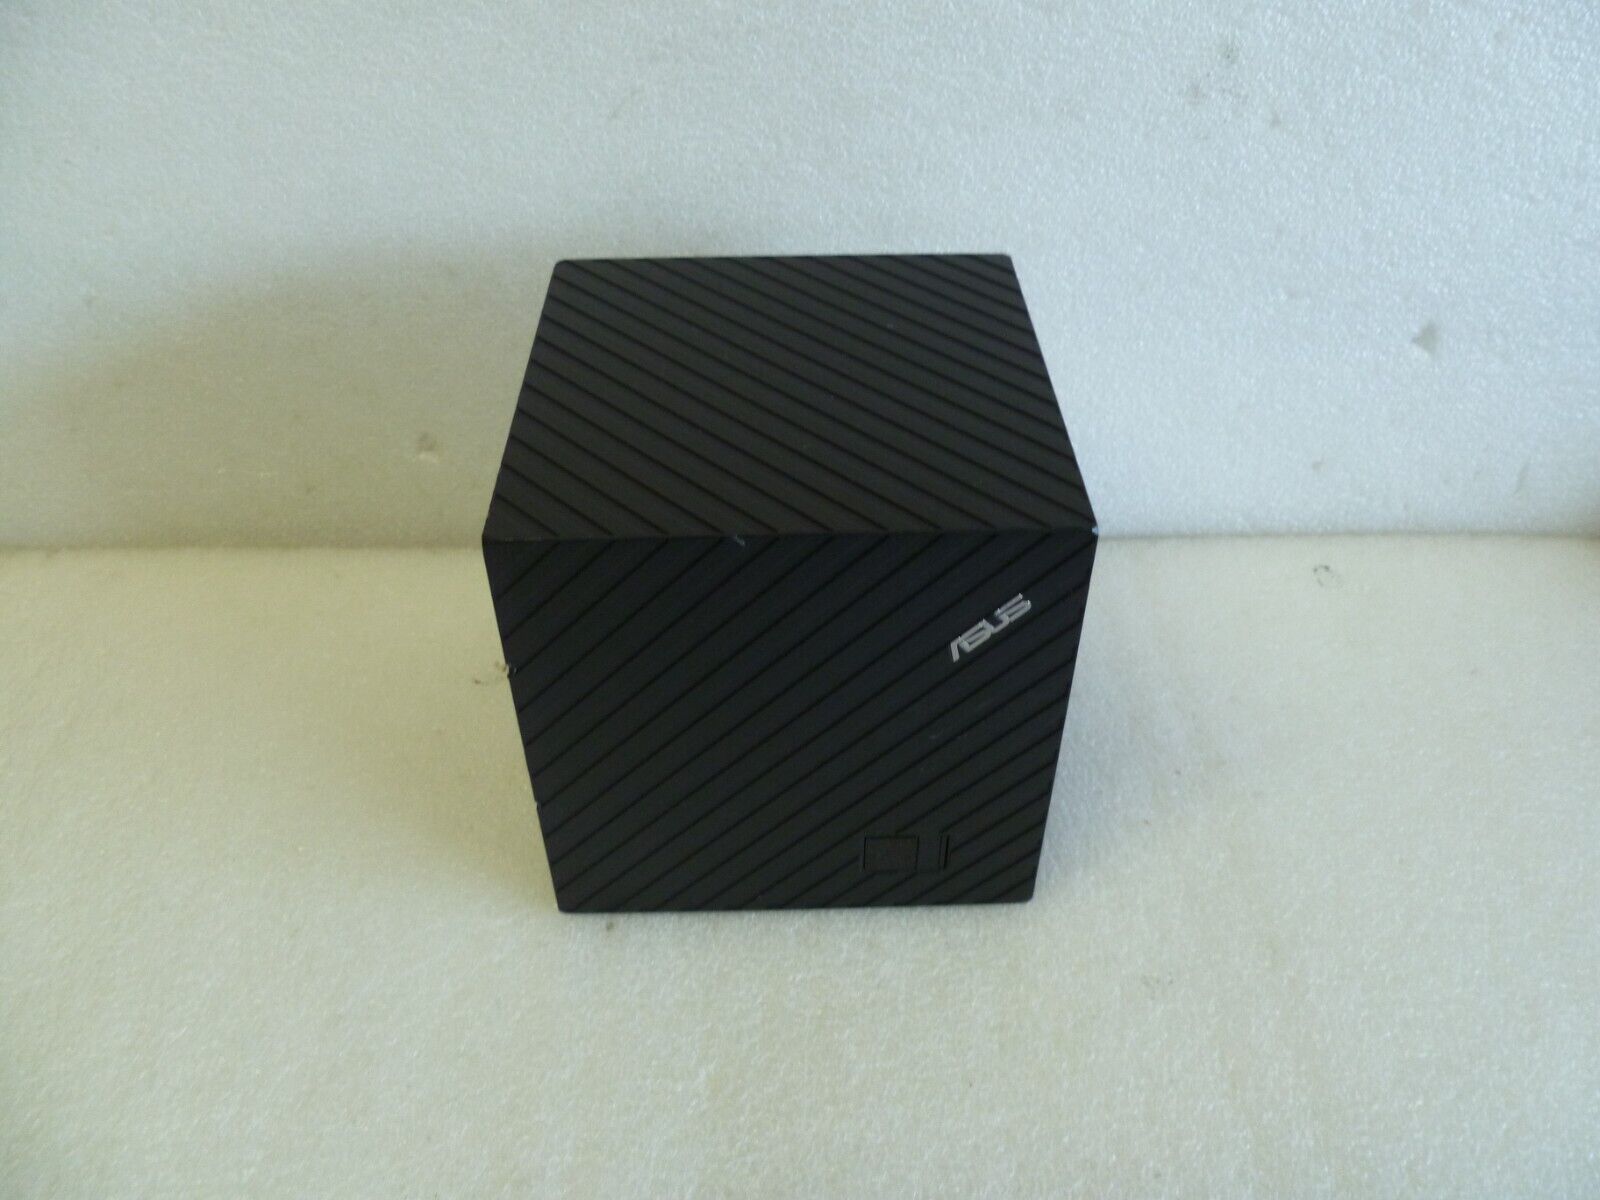 ASUS CUBE WITH GOOGLE TV MEDIA STREAMER